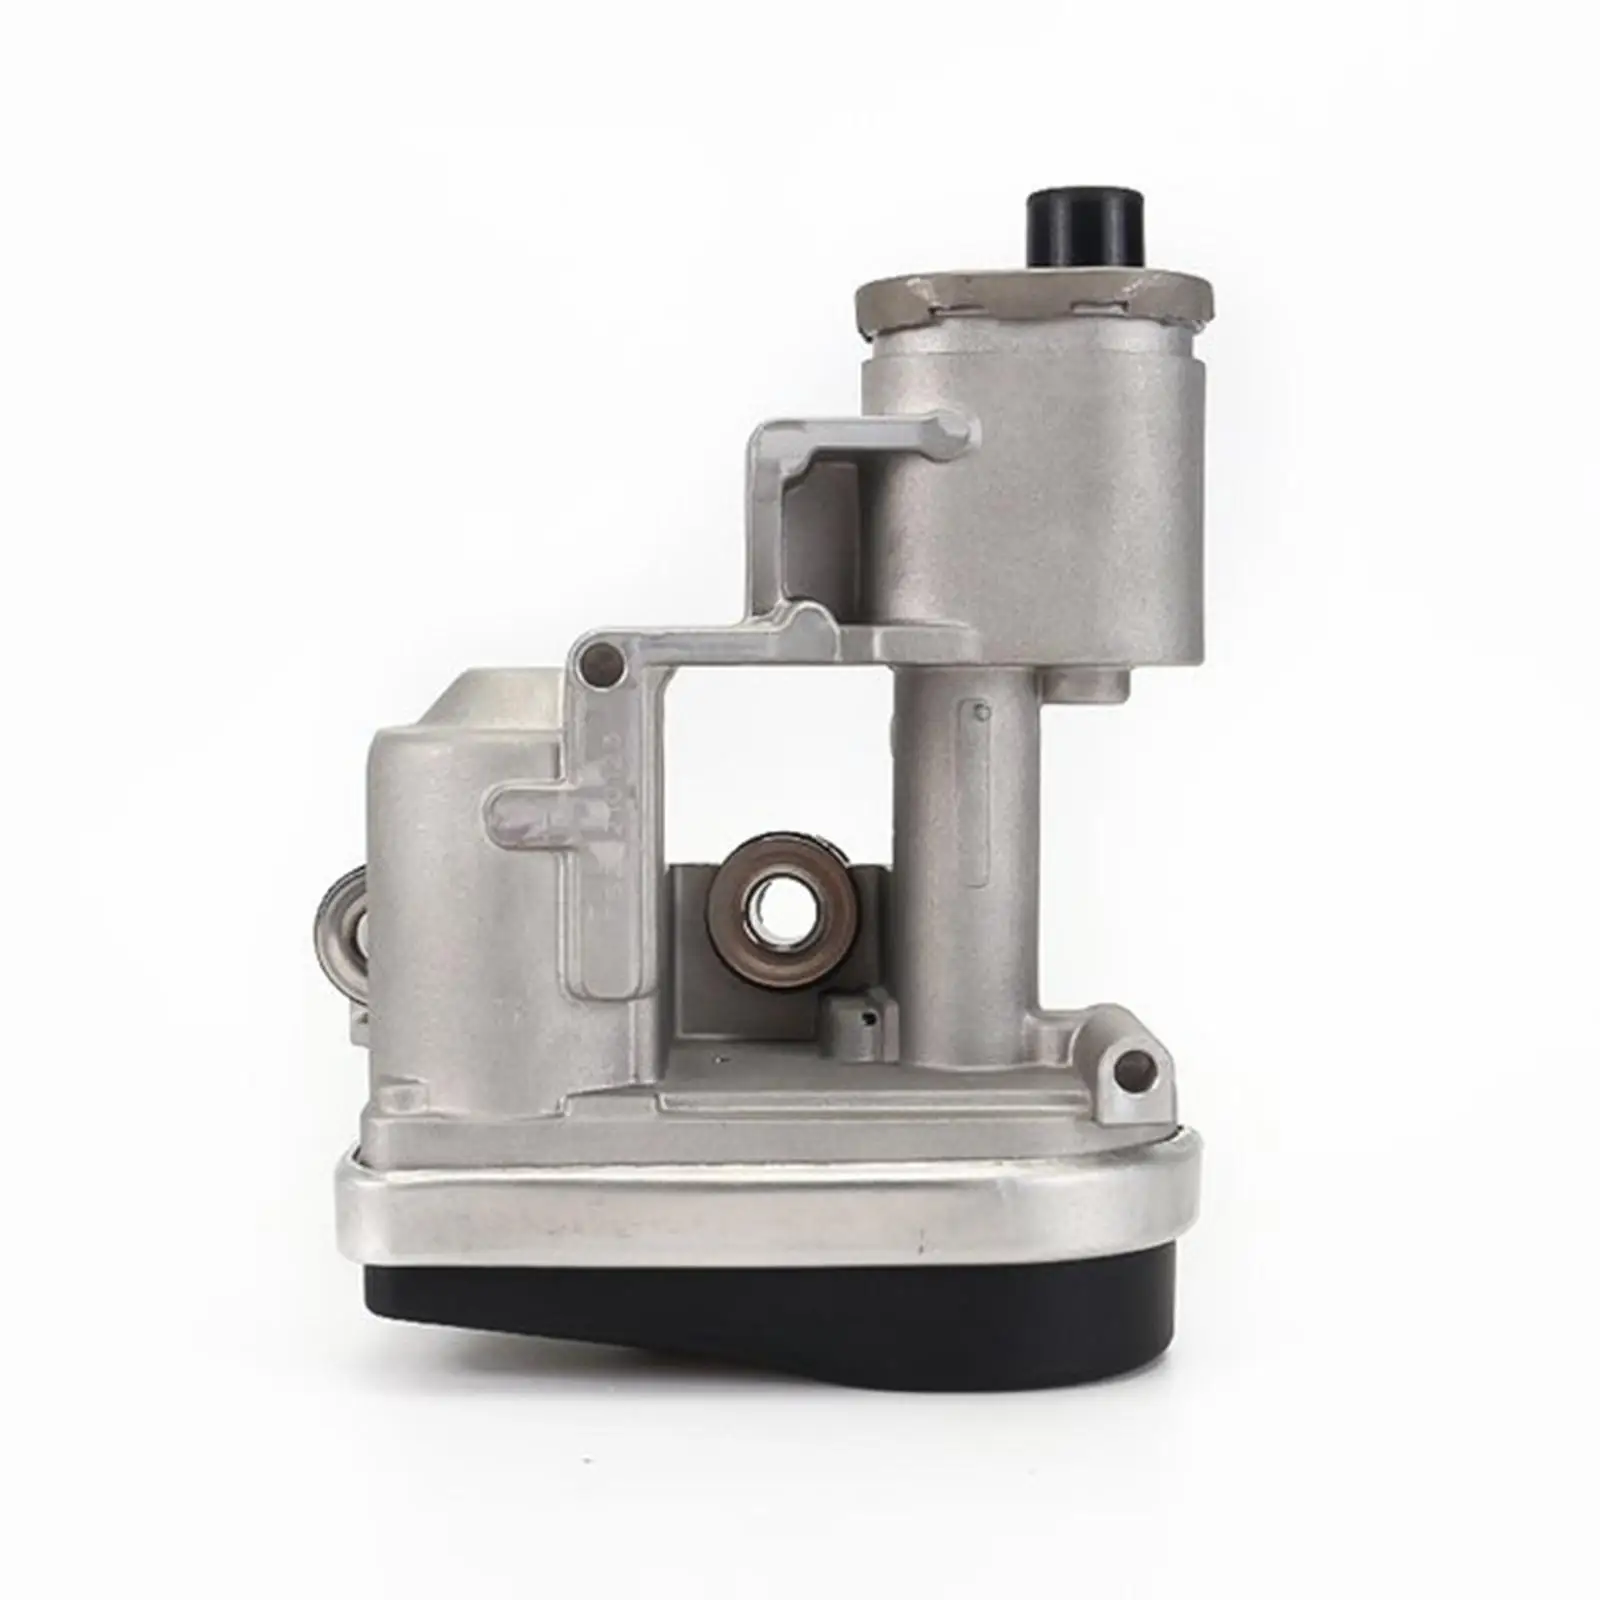 Auto Transmission Throttle Valve Actuator Throttle Control Lever for , 35,.9L 6.7L 6 Cyl Turbocharged Parts Replacement